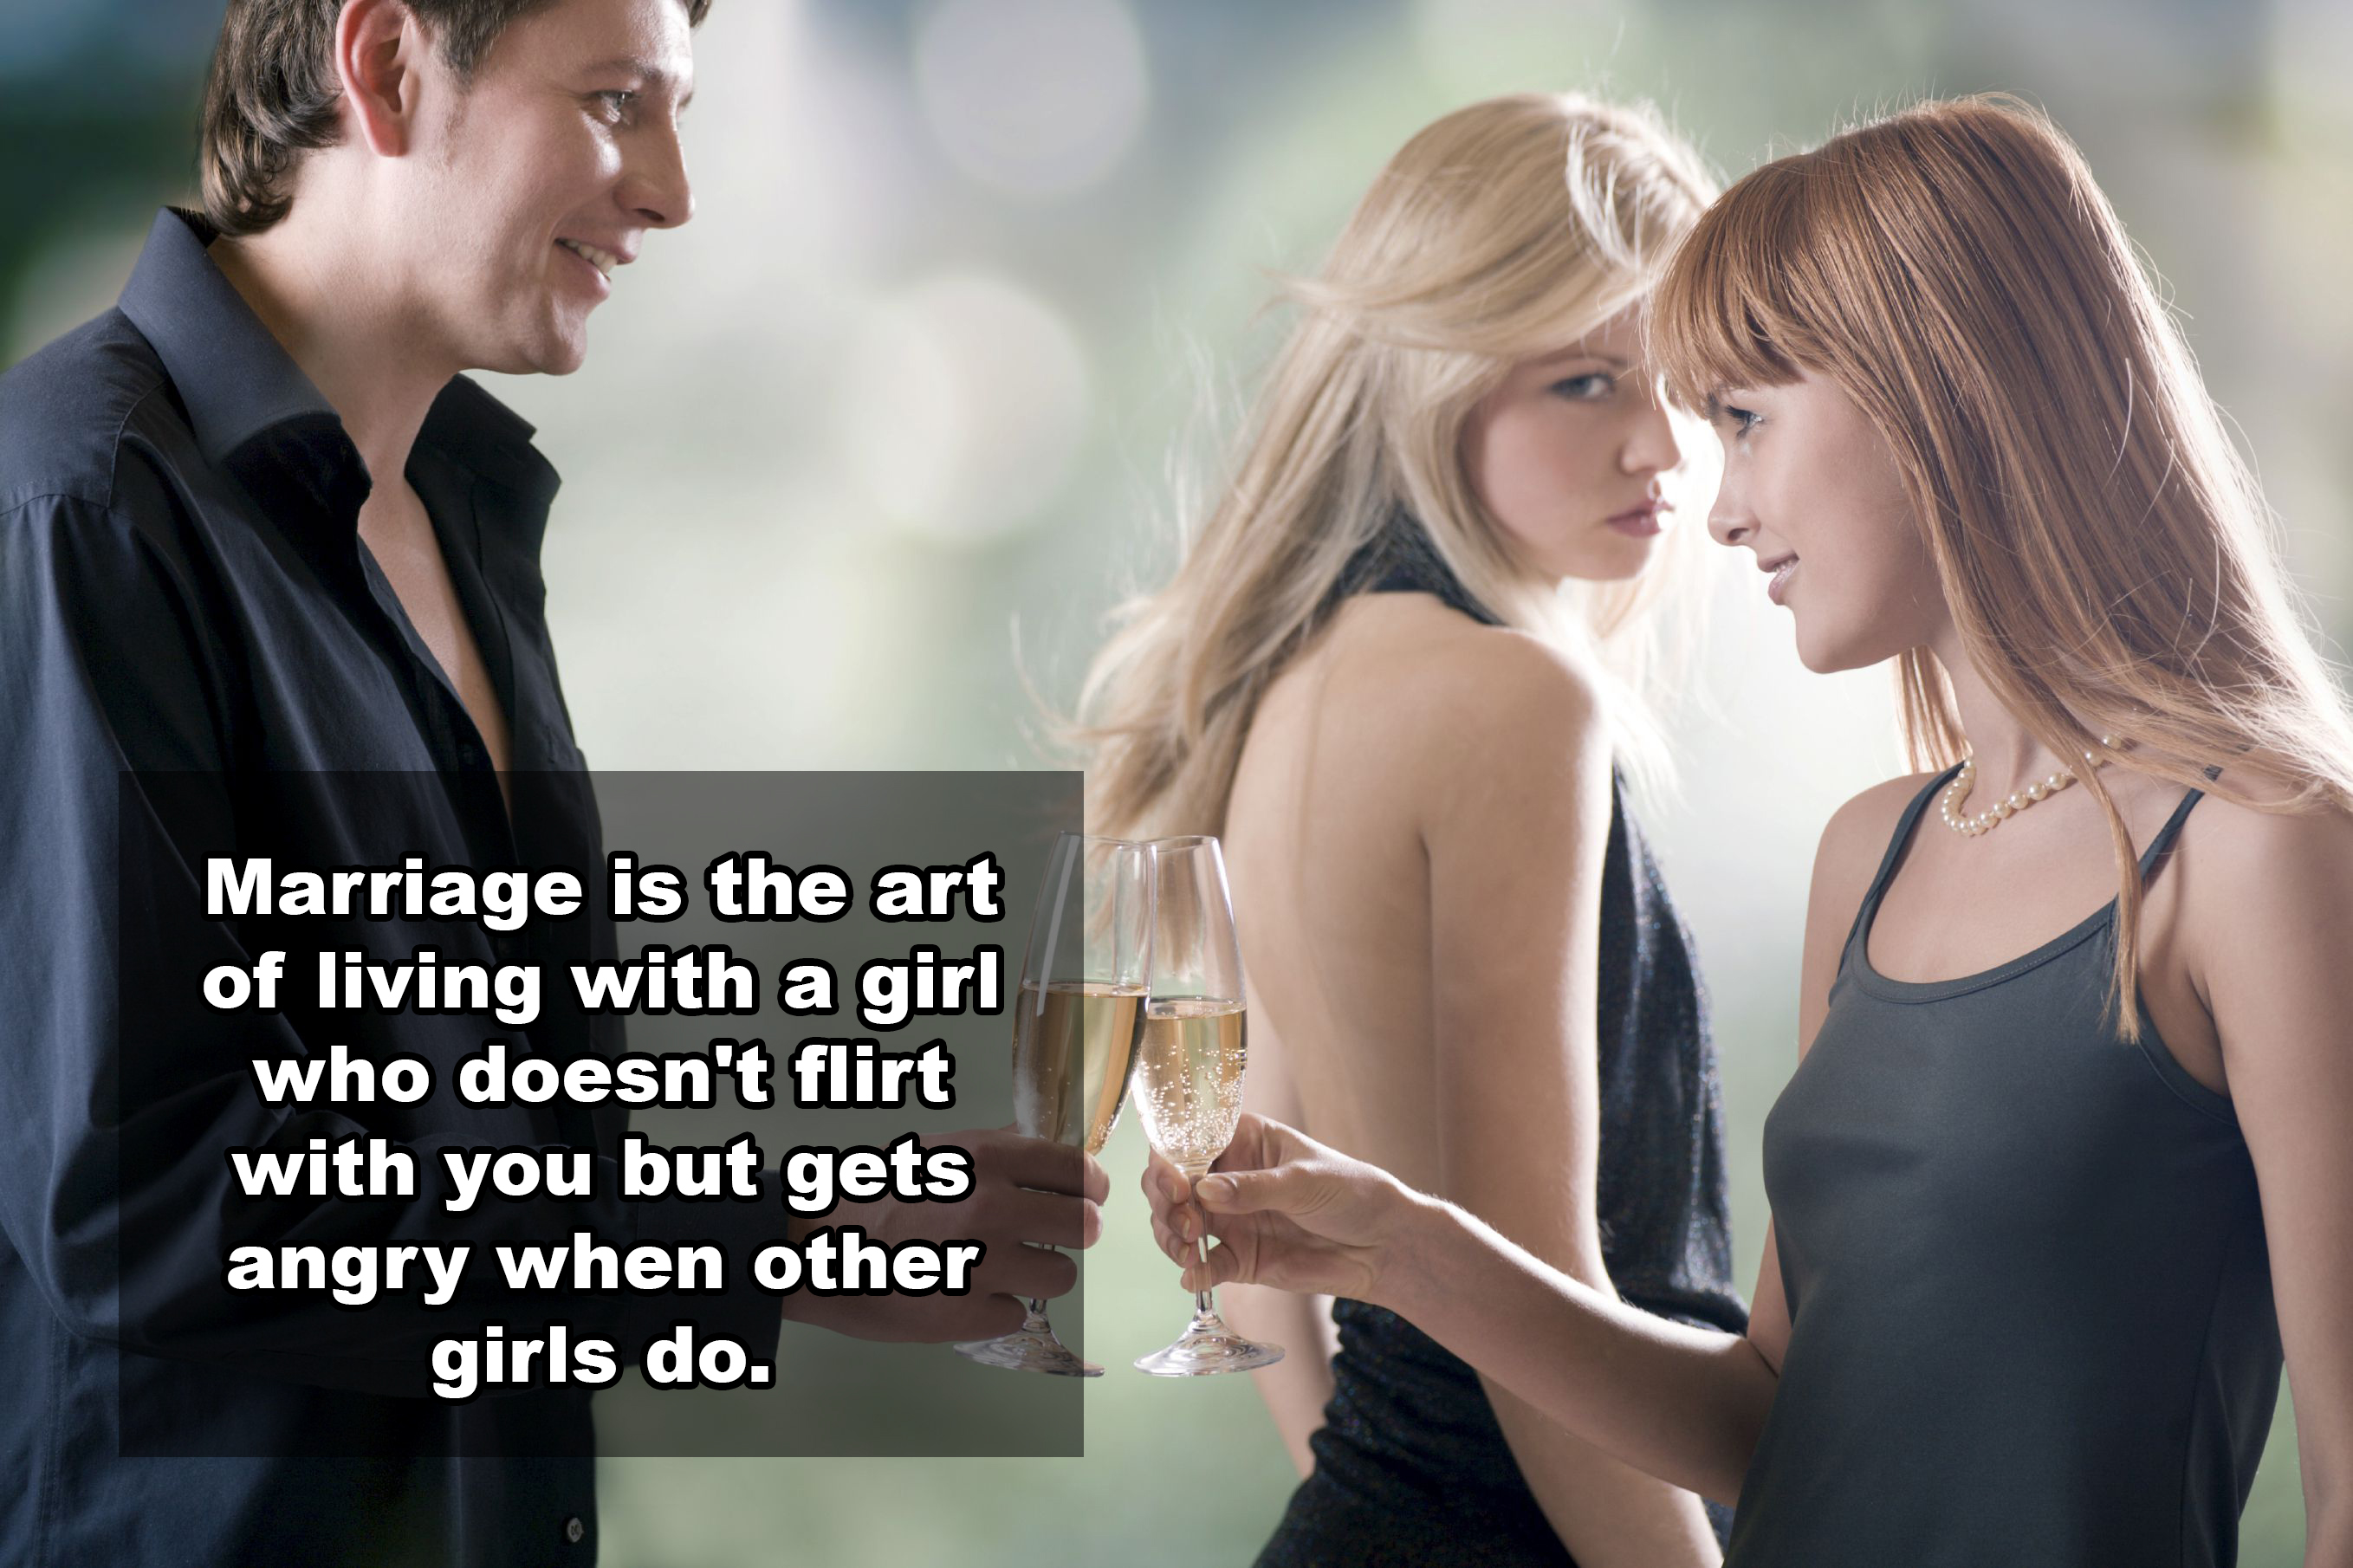 jealous face - Marriage is the art of living with a girl who doesn't flirt with you but gets angry when other girls do.